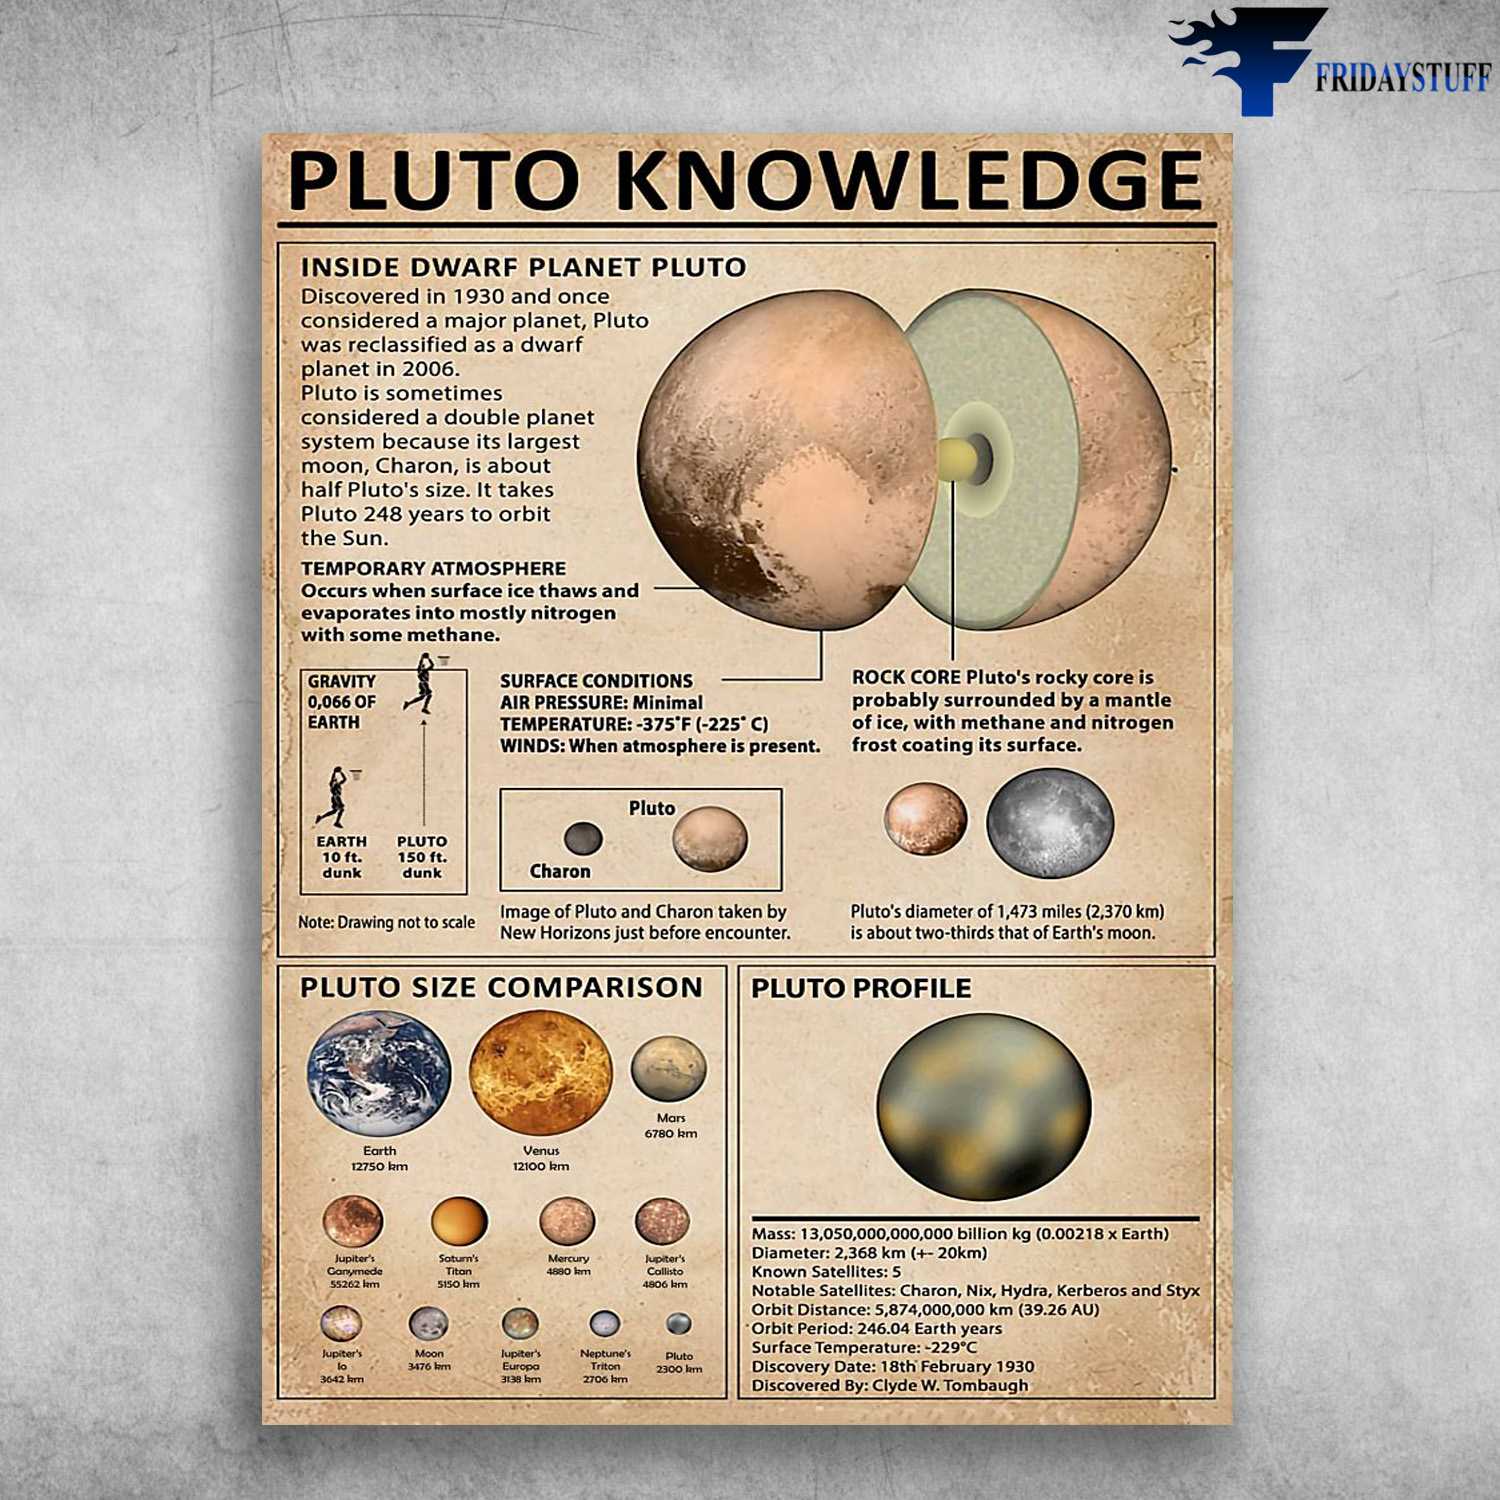 Pluto Knowledge - Inside Dwarf Planet Pluto, Discovered In 1930, And One Considered A Major Planet, Pluto Size Comparison, Pluto Profile